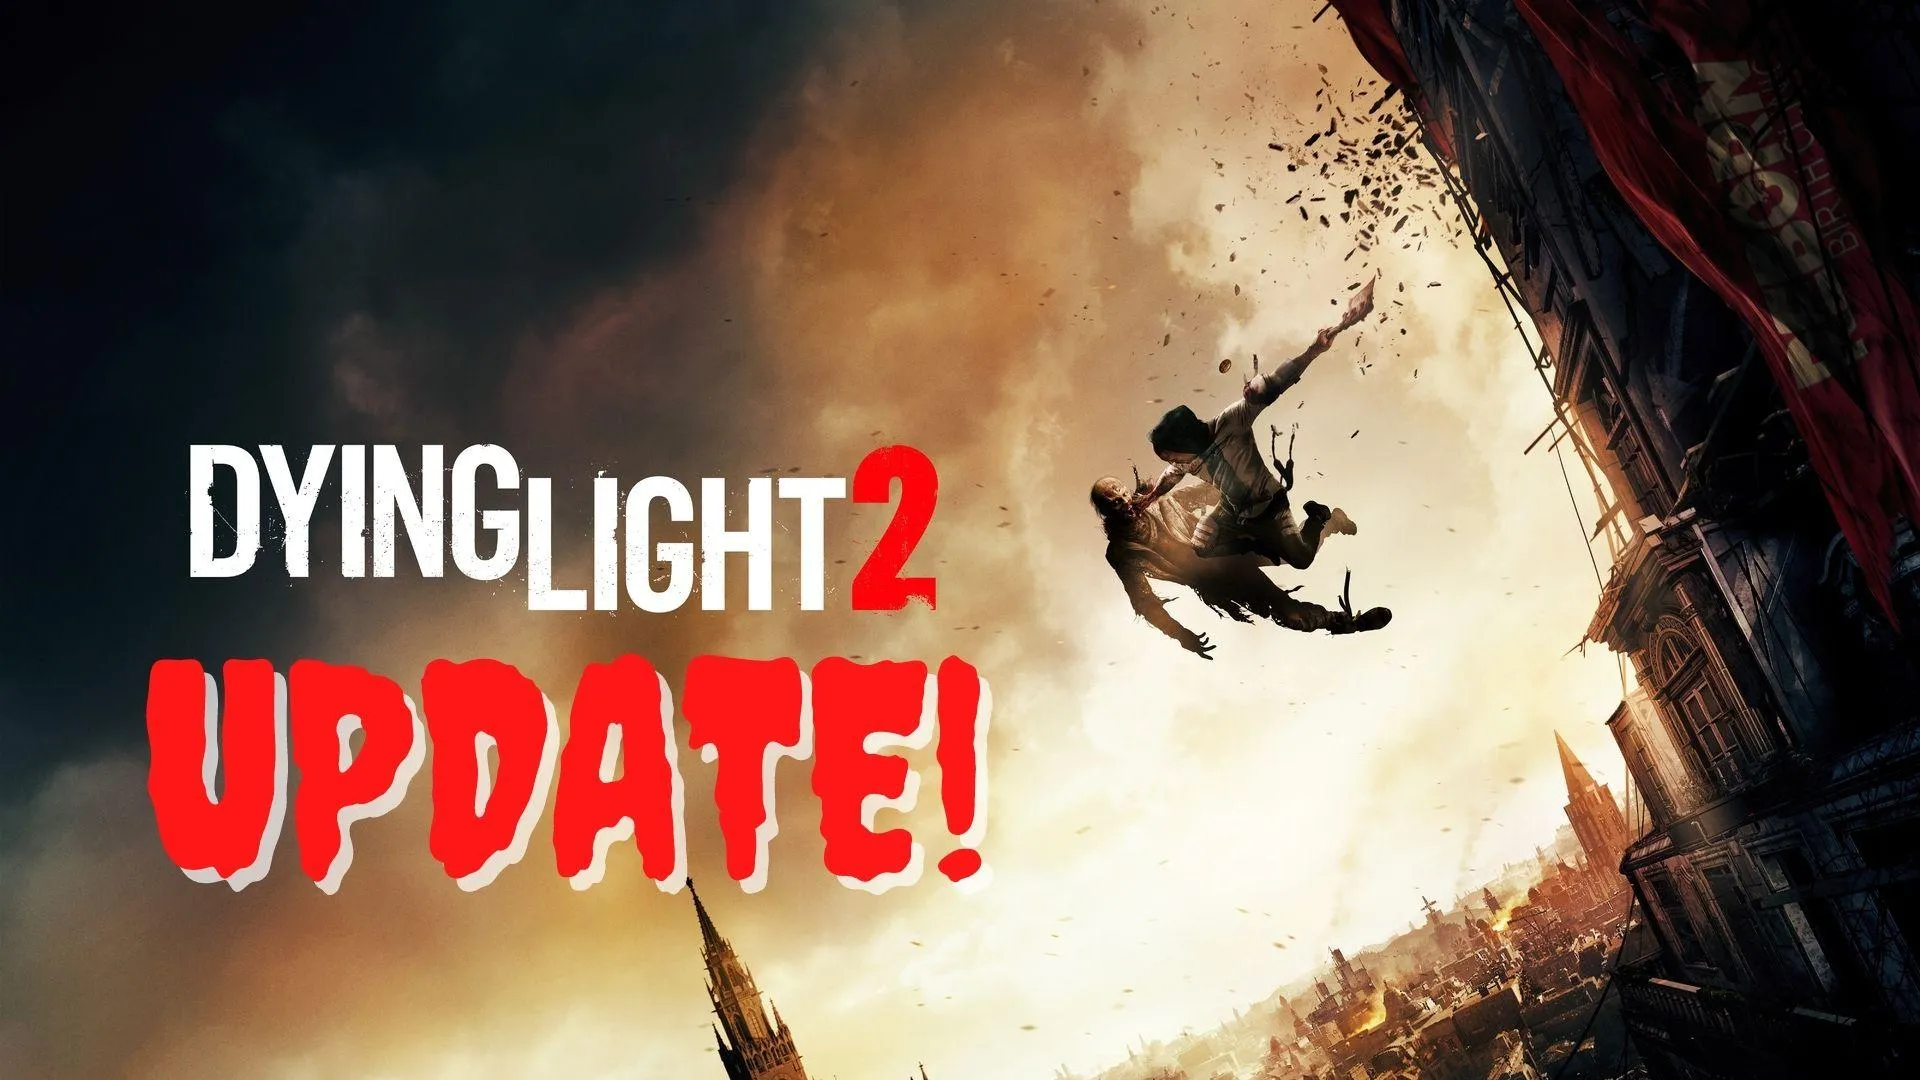 Dying Light 2 Update, New Life Is Strange Game and More – Upcoming Games News [March 2021]